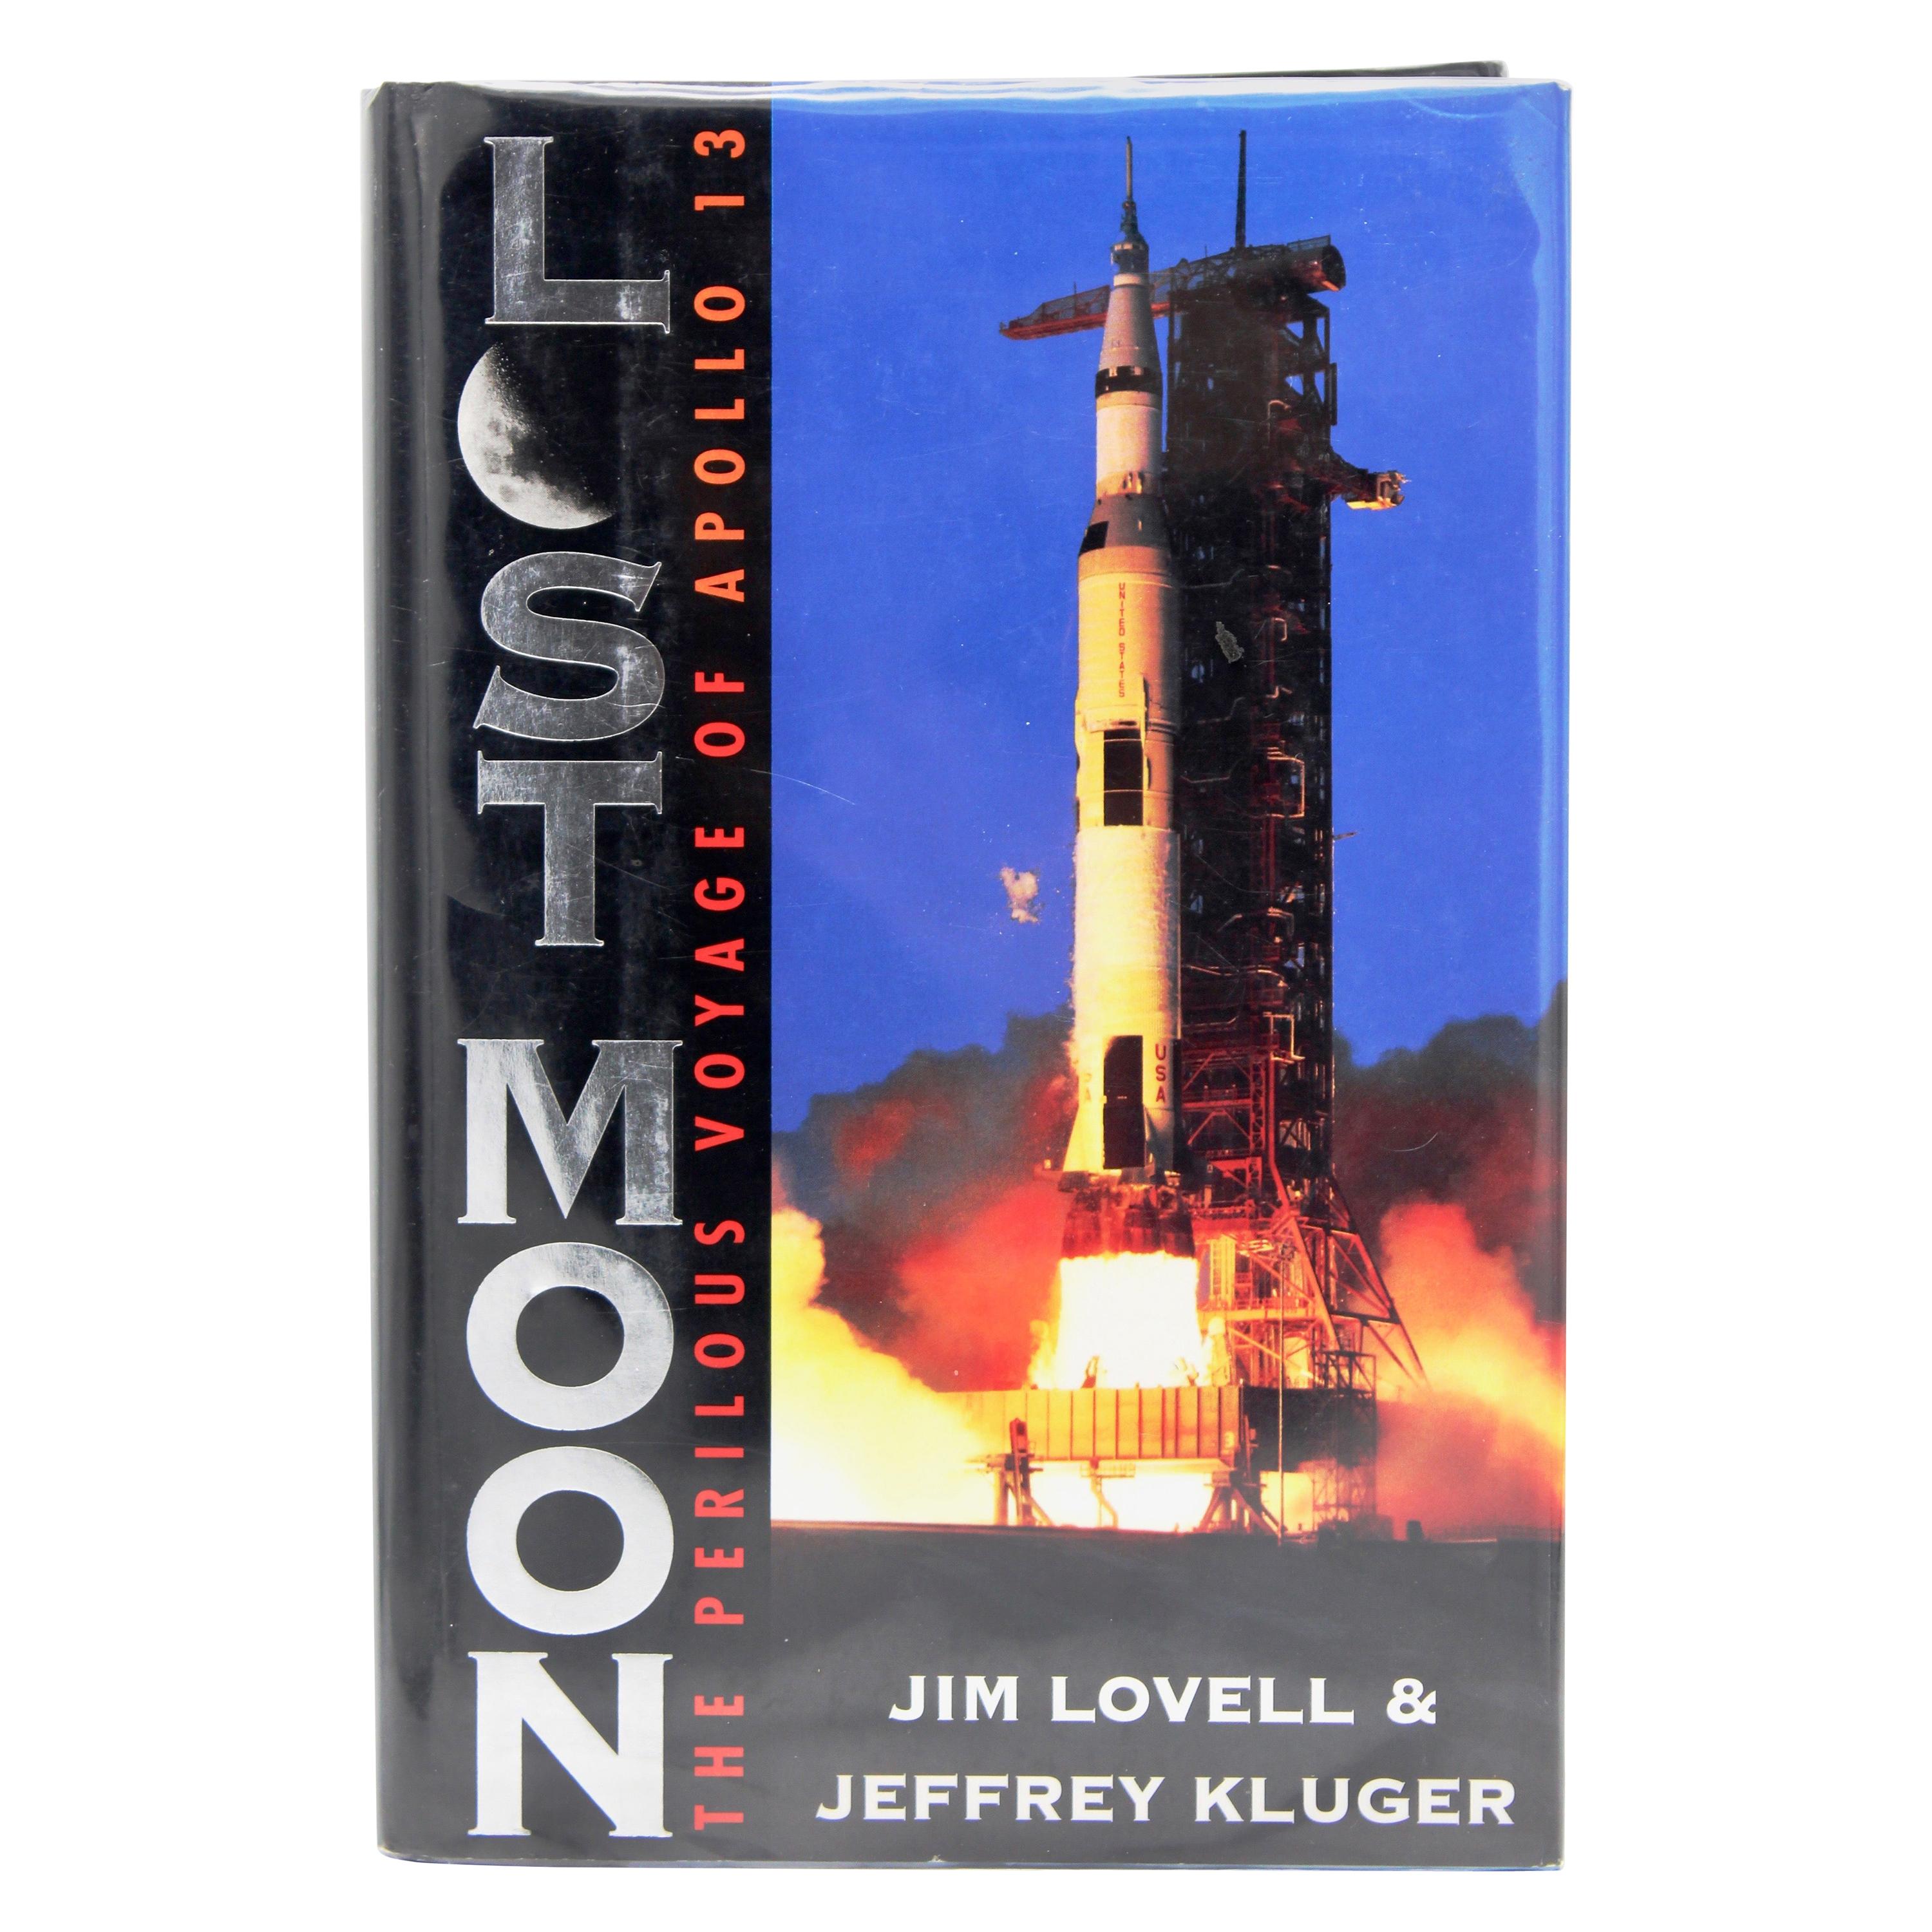 Lost Moon, by Jim Lovell and Jeffrey Kluger, Signed by James Lovell, 1994